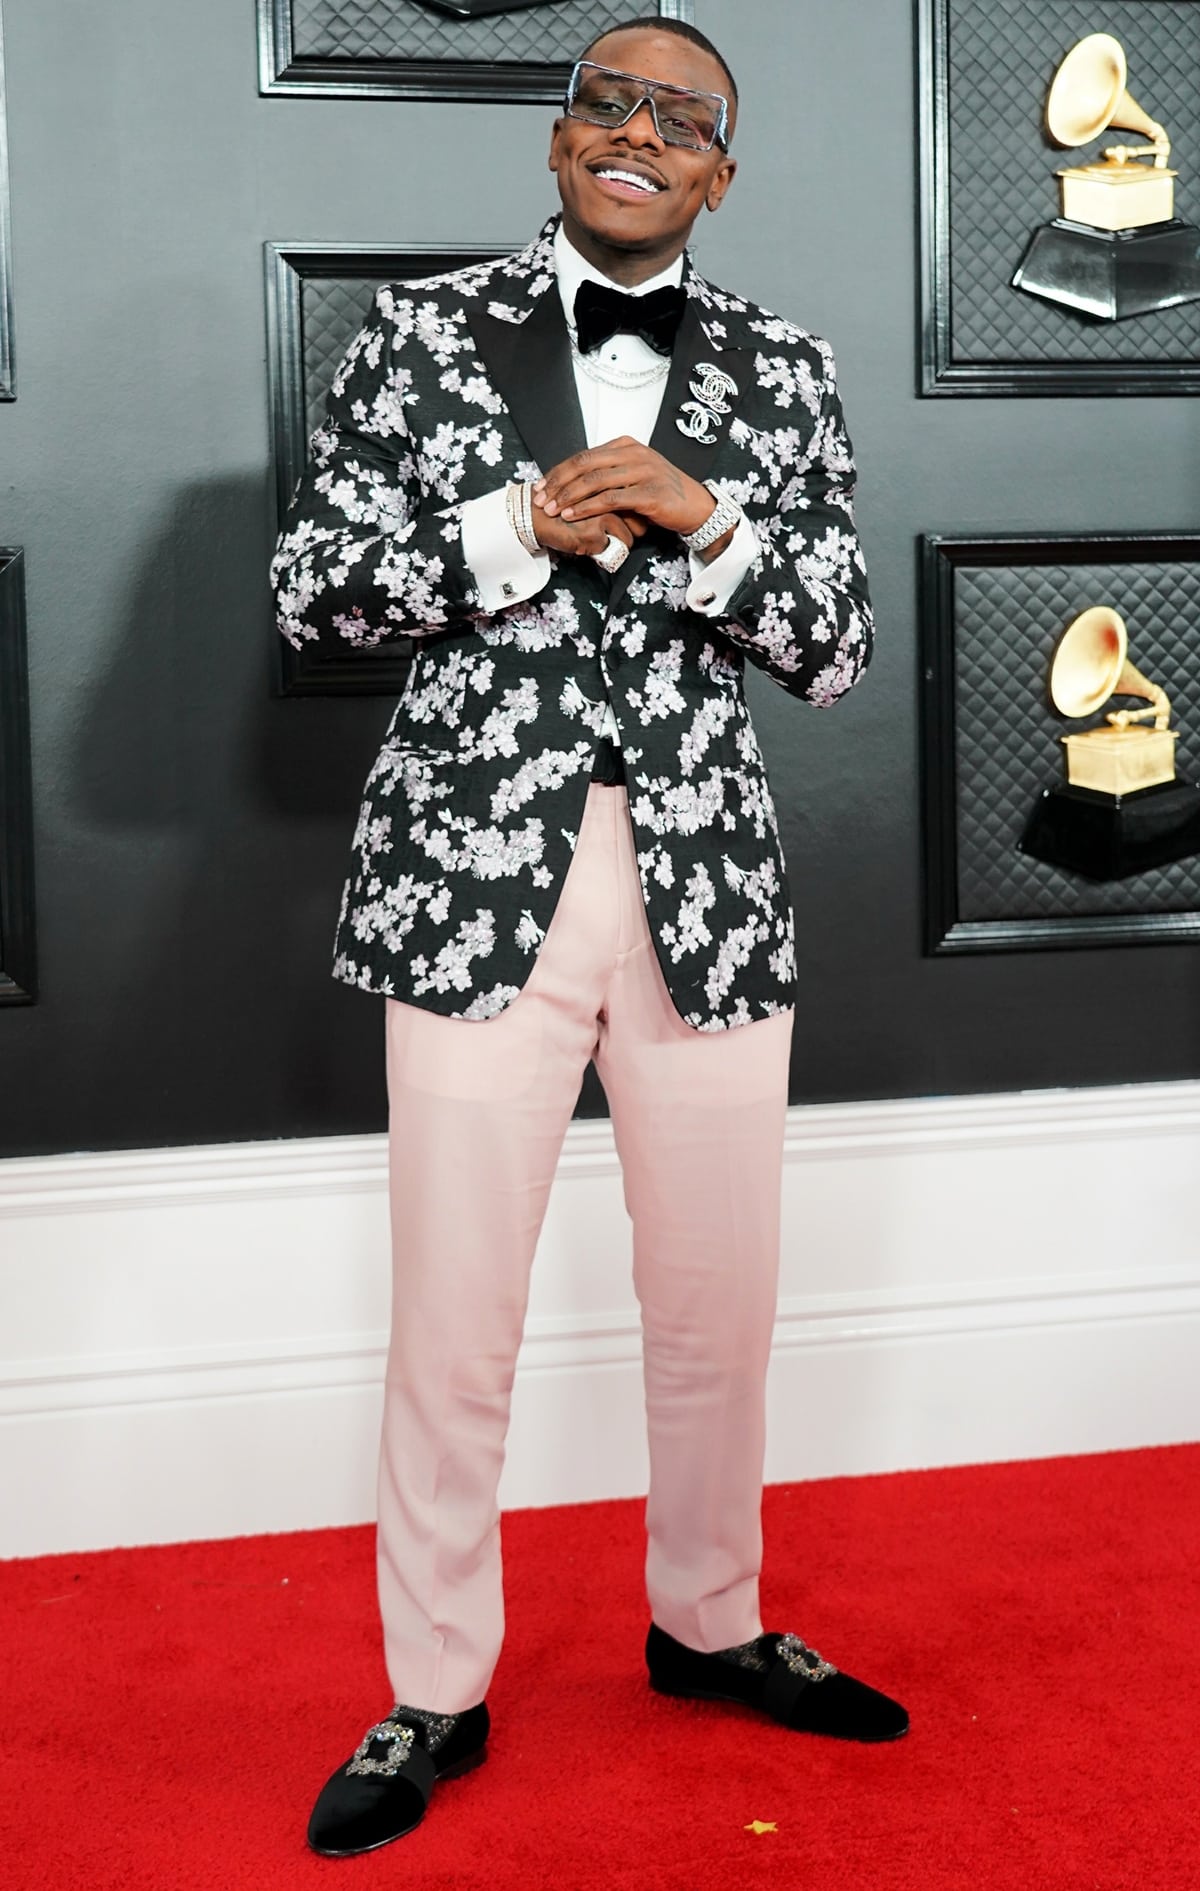 Jonathan Lyndale Kirk, known professionally as DaBaby, attends the 62nd Annual GRAMMY Awards